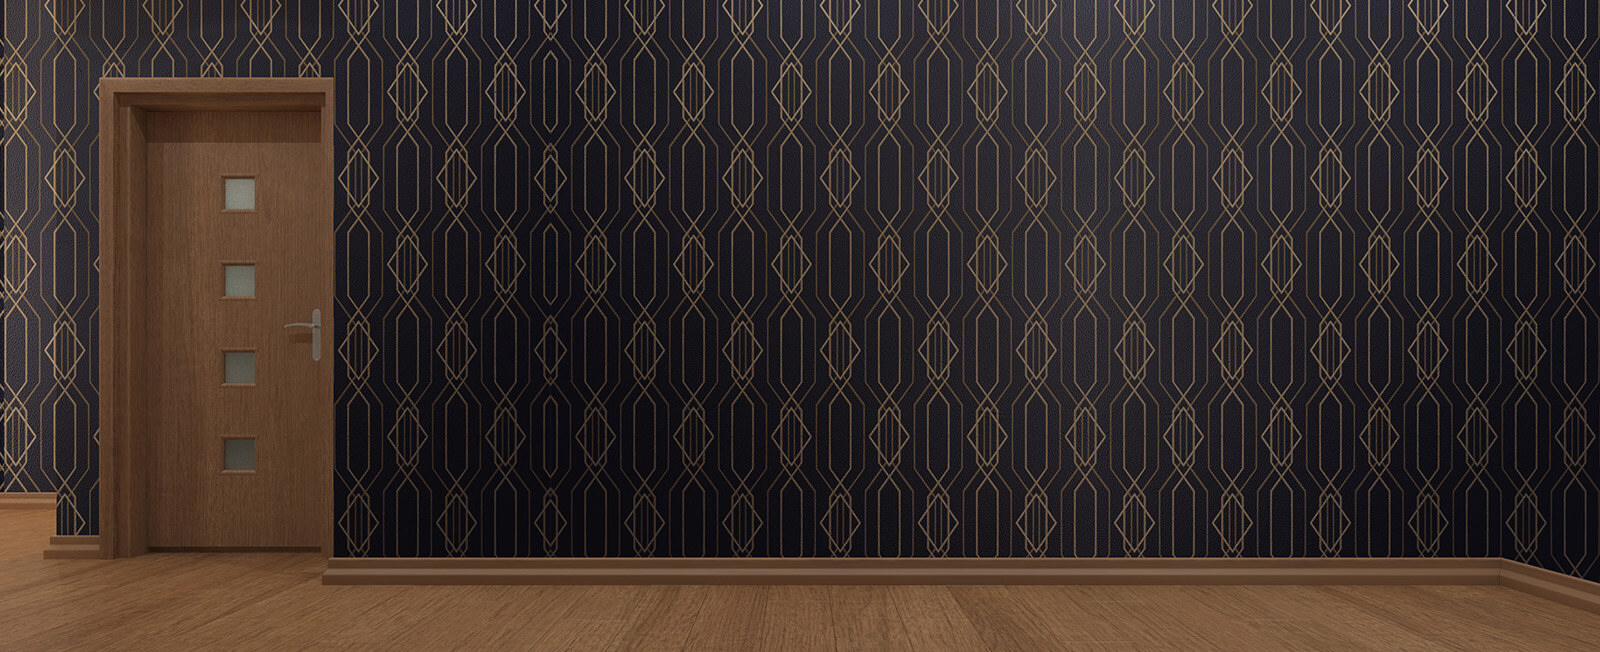 Welcome to Pious Wallpaper Co.